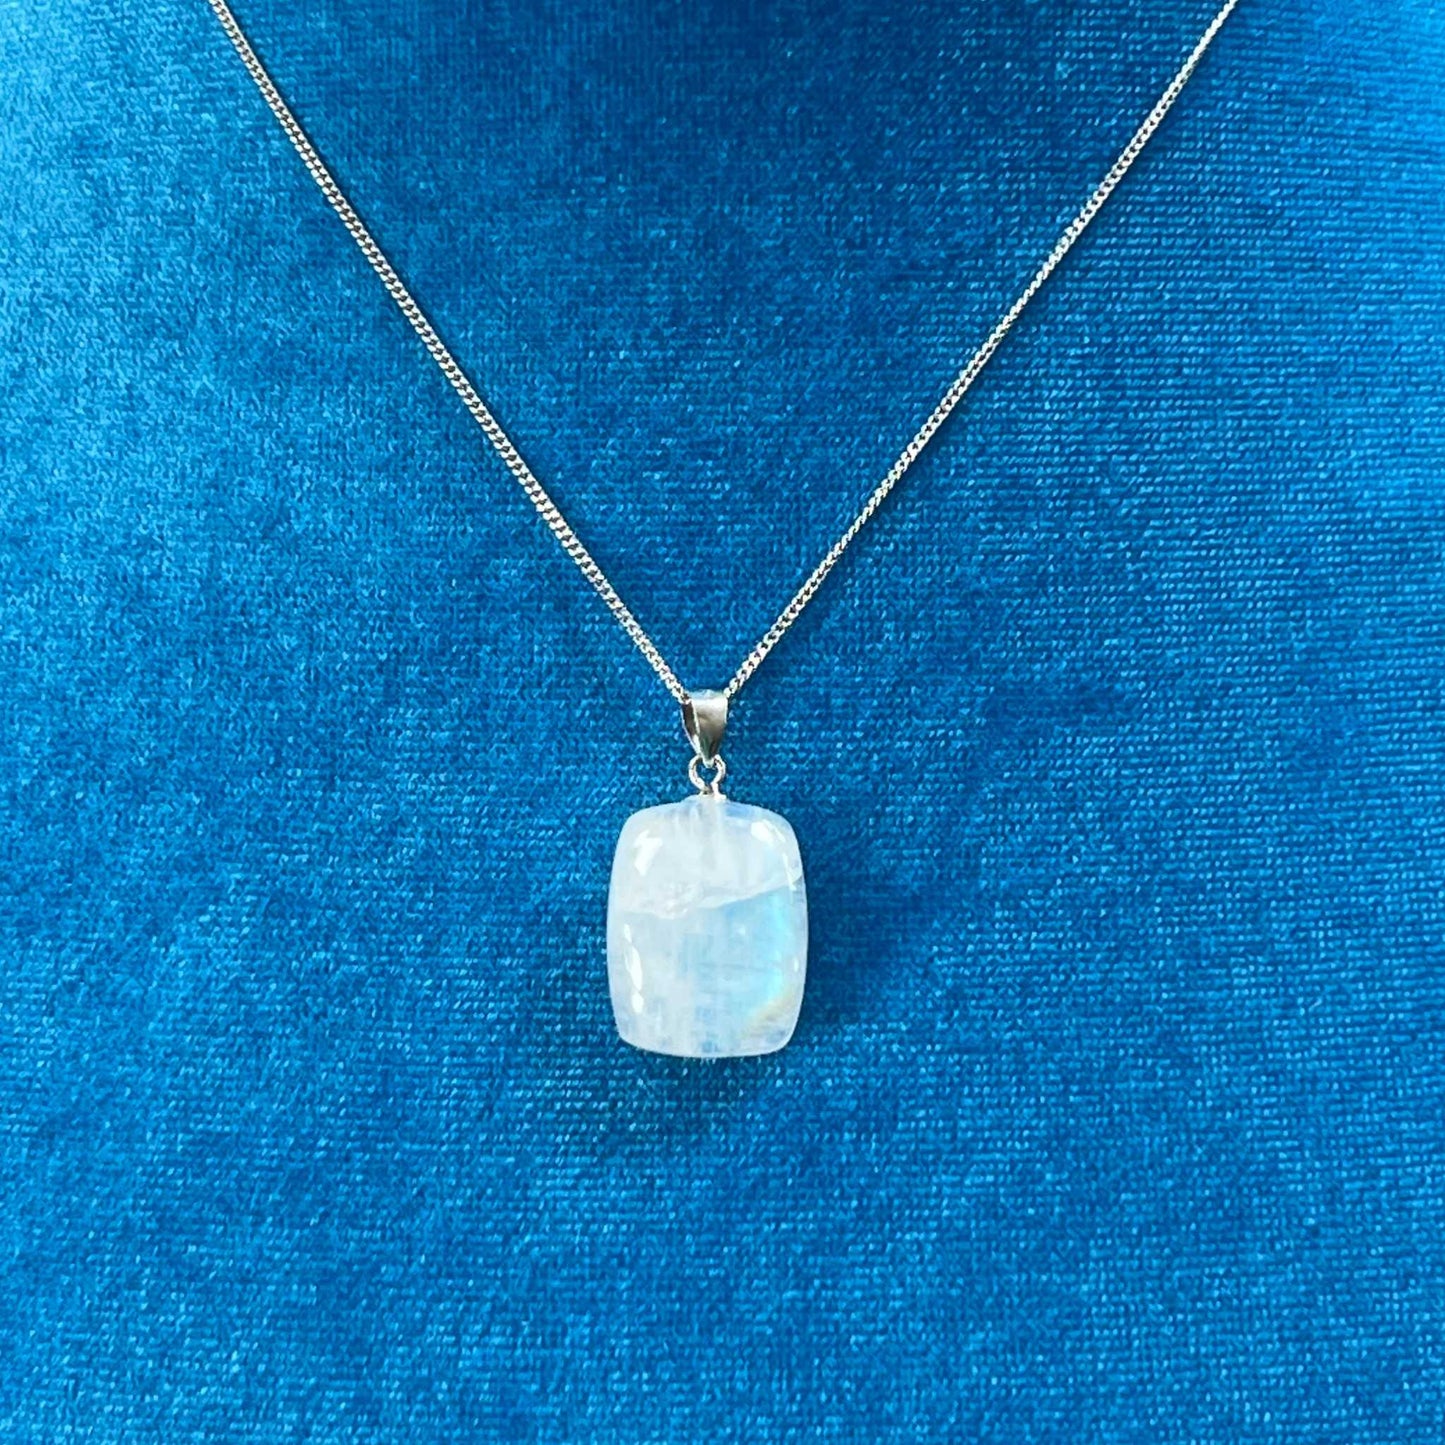 AAA Moonstone Crystal Pendant on a Delicate Sterling Silver Chain